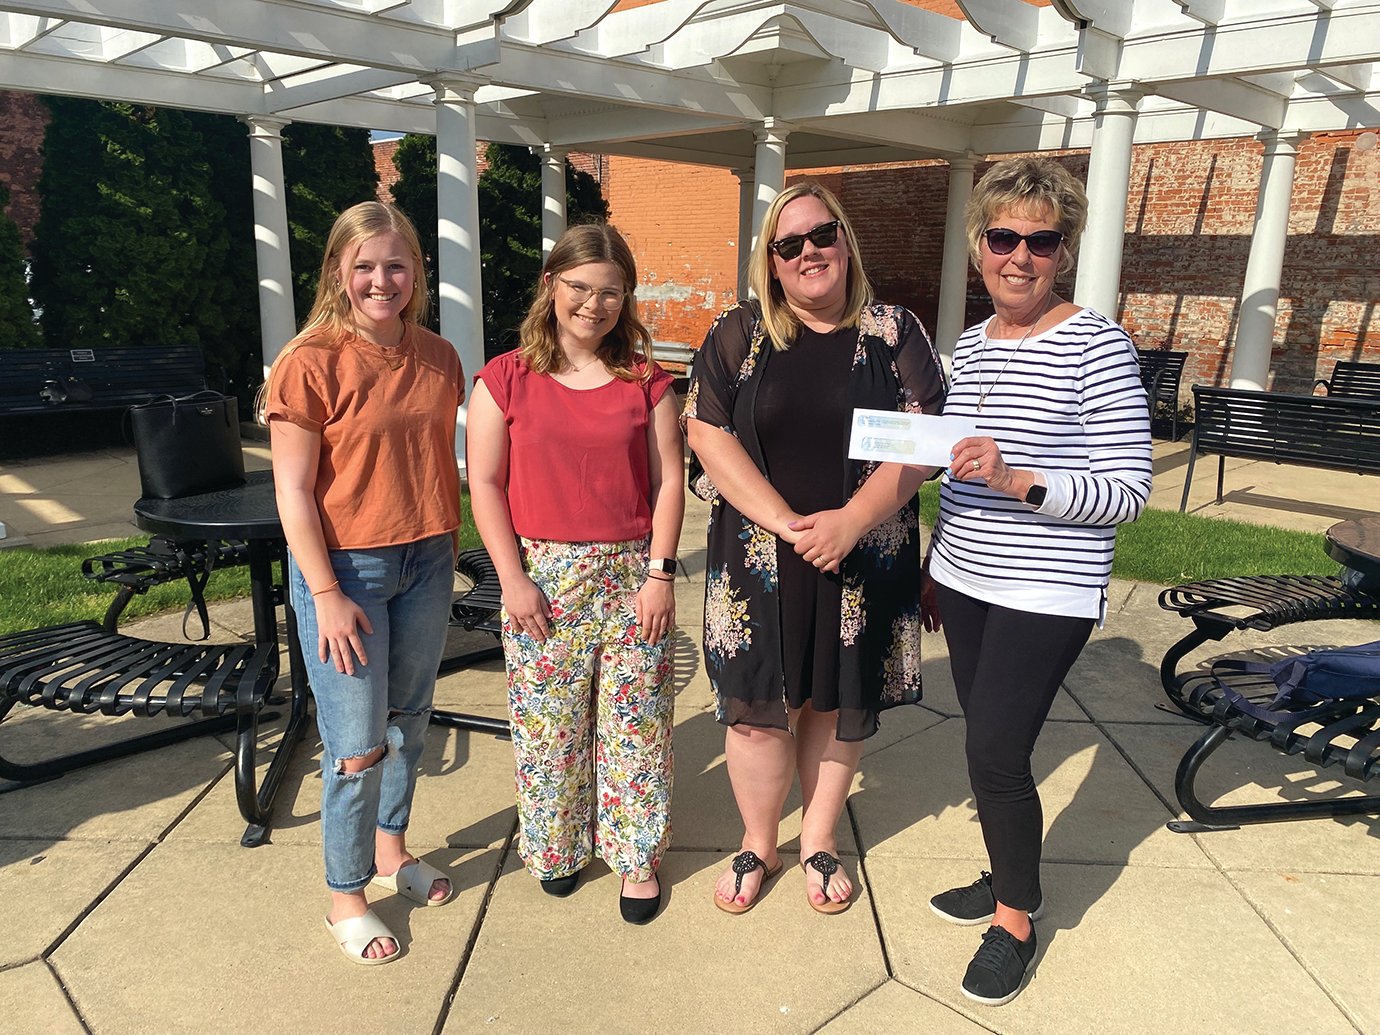 Representing Camp Milligan, the Montgomery County Community Foundation and Crawfordsville Parks & Recreation via check presentation Monday were Marley Dyson, from left, Amy Hutchison, Lisa Walter and Joyce Grimble.